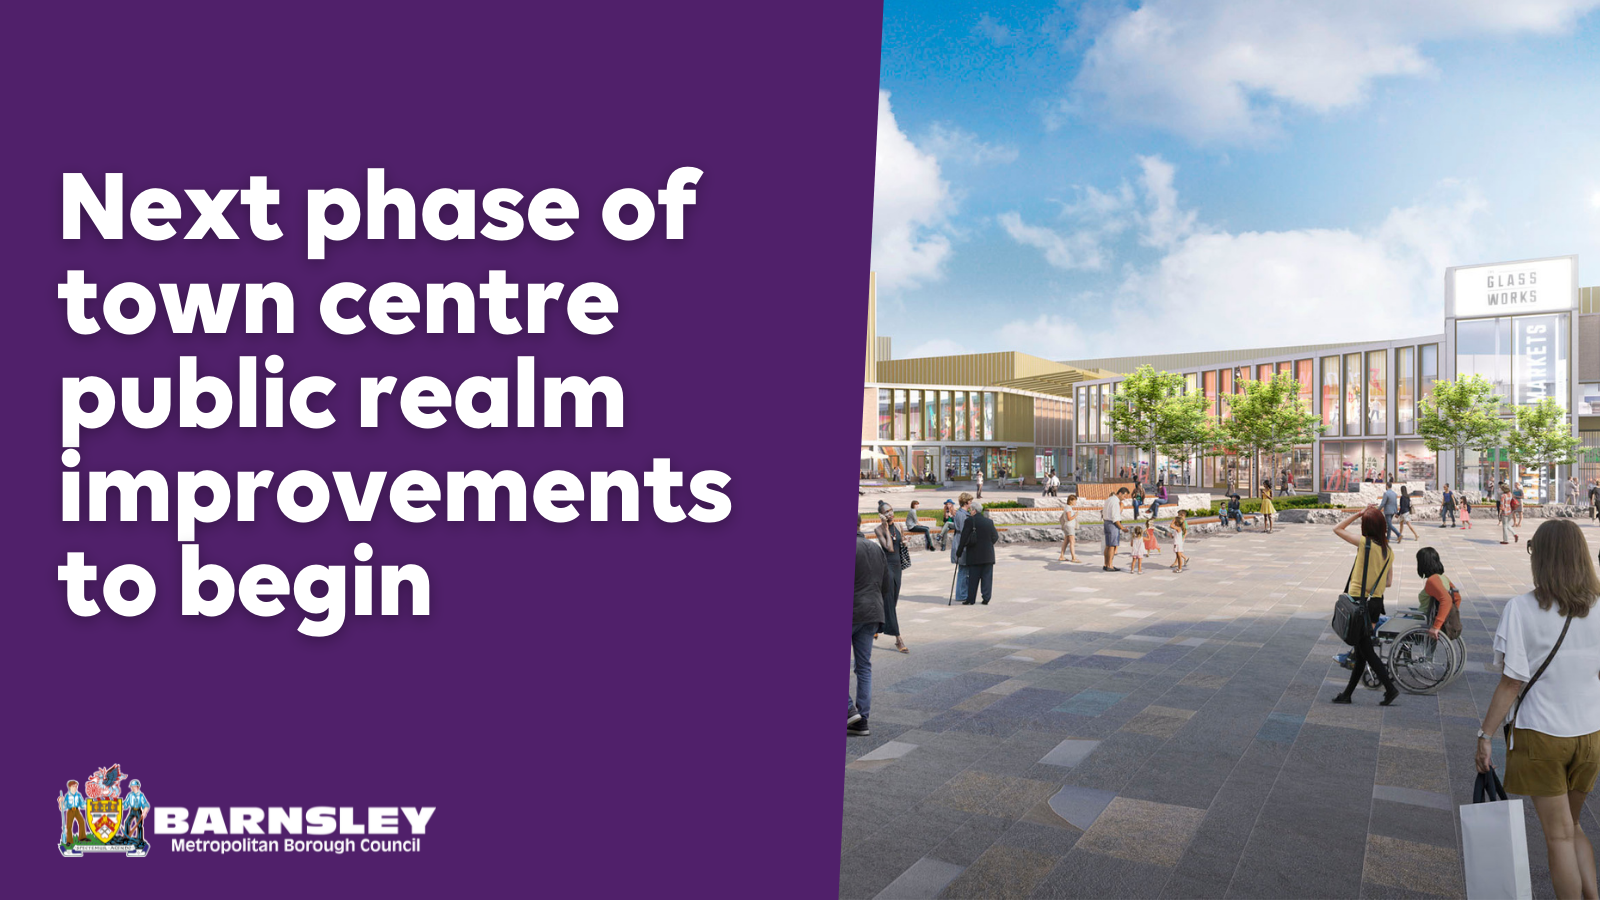 Next phase of the town centre public realm improvements to begin